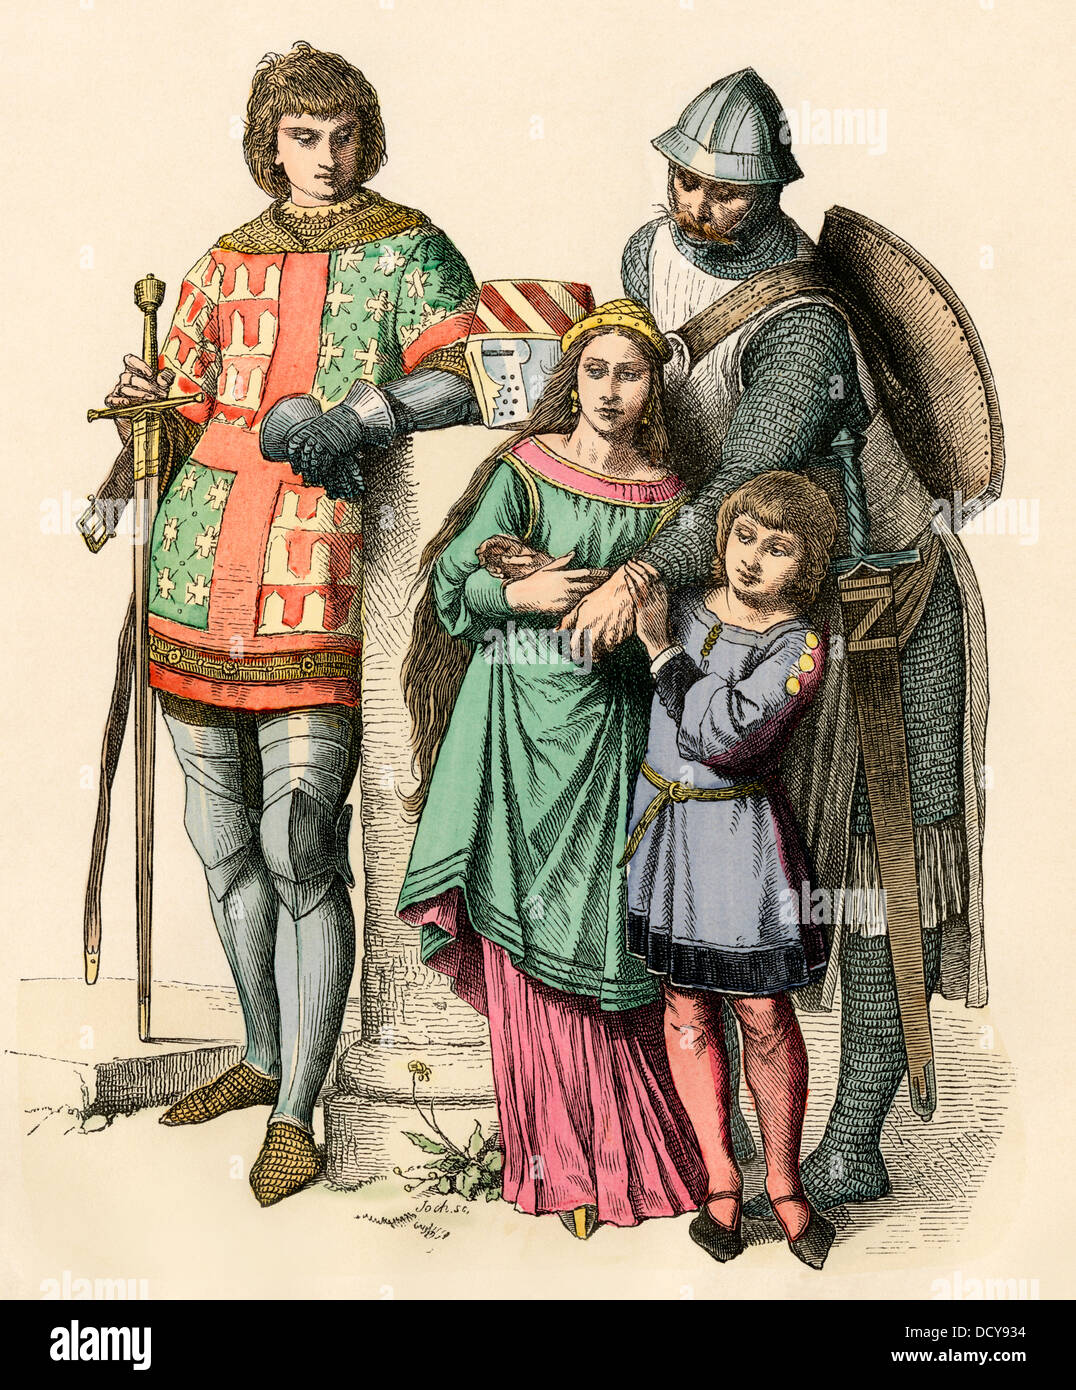 German knight with his family, Middle Ages. Hand-colored print Stock Photo